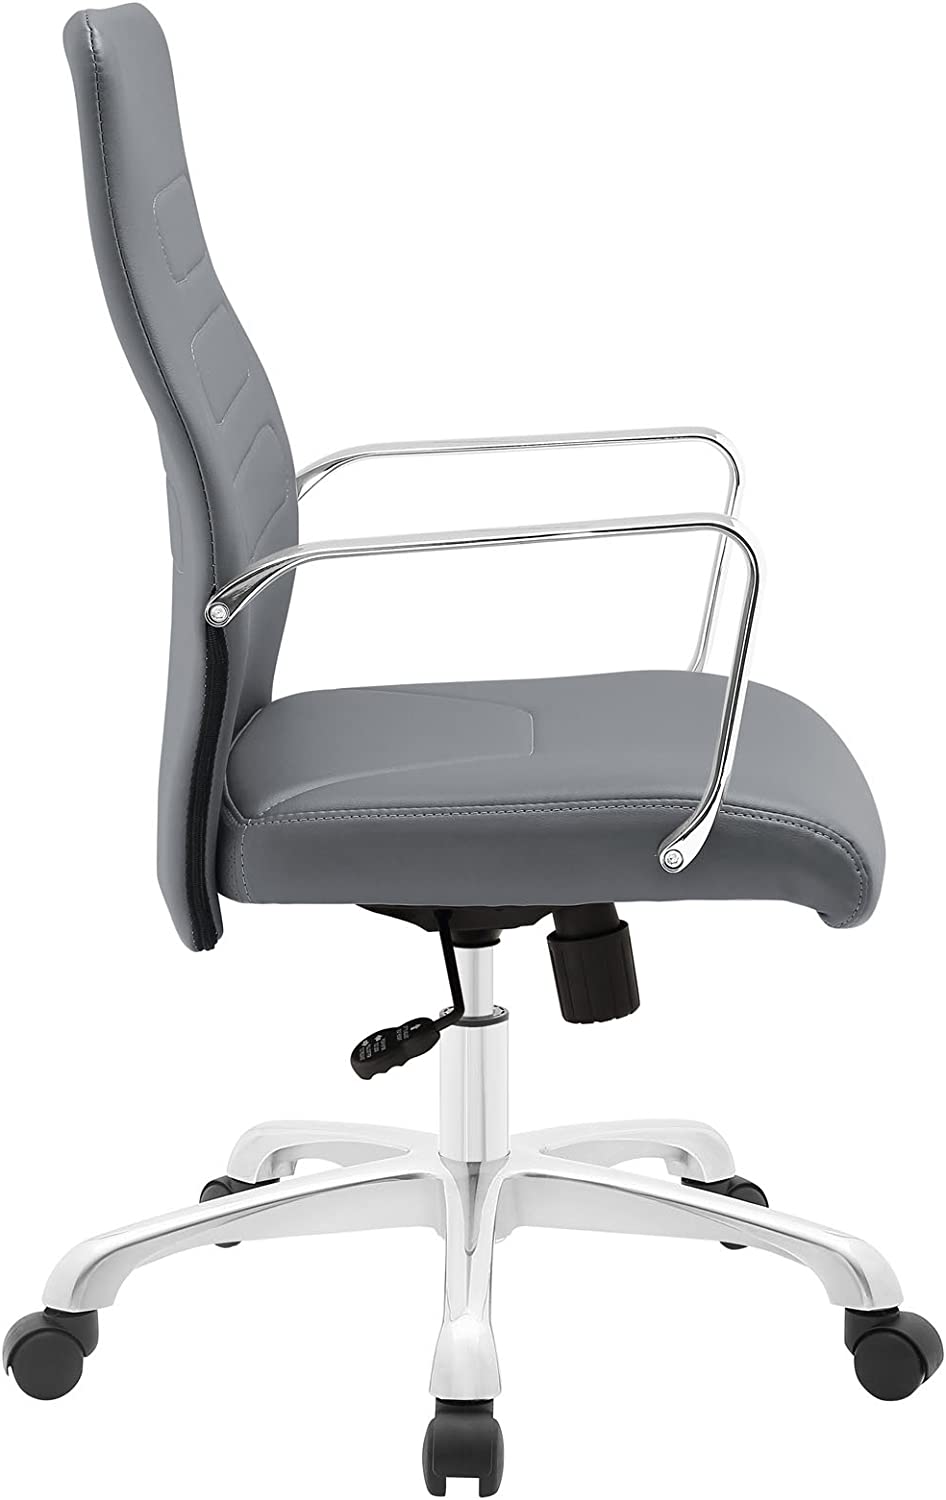 Modway Depict Contemporary Modern Faux Leather Swivel Office Chair in White